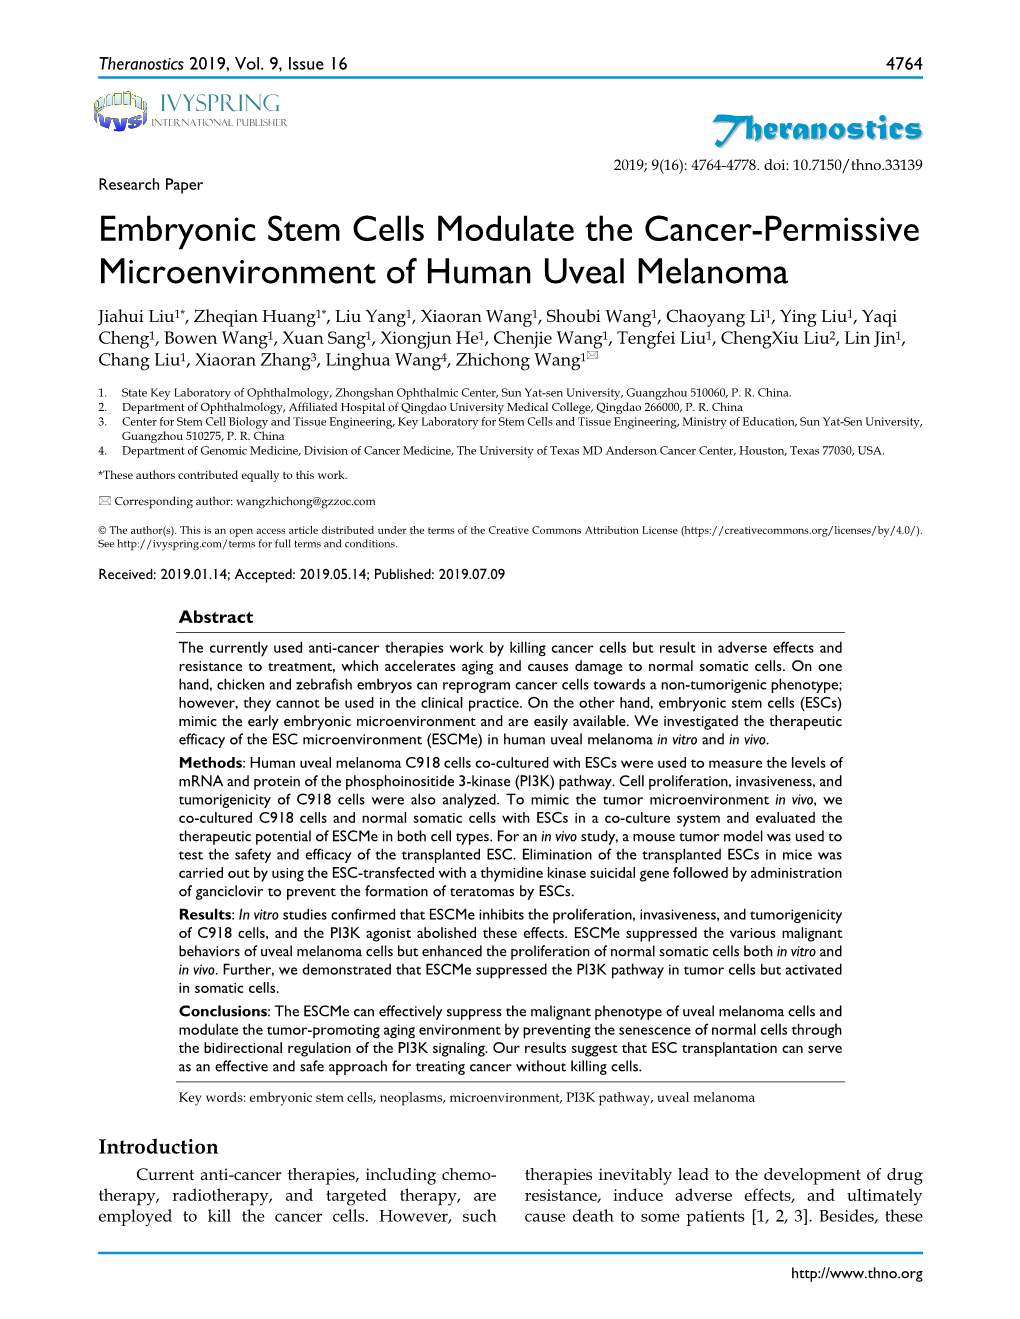 Embryonic Stem Cells Modulate the Cancer-Permissive